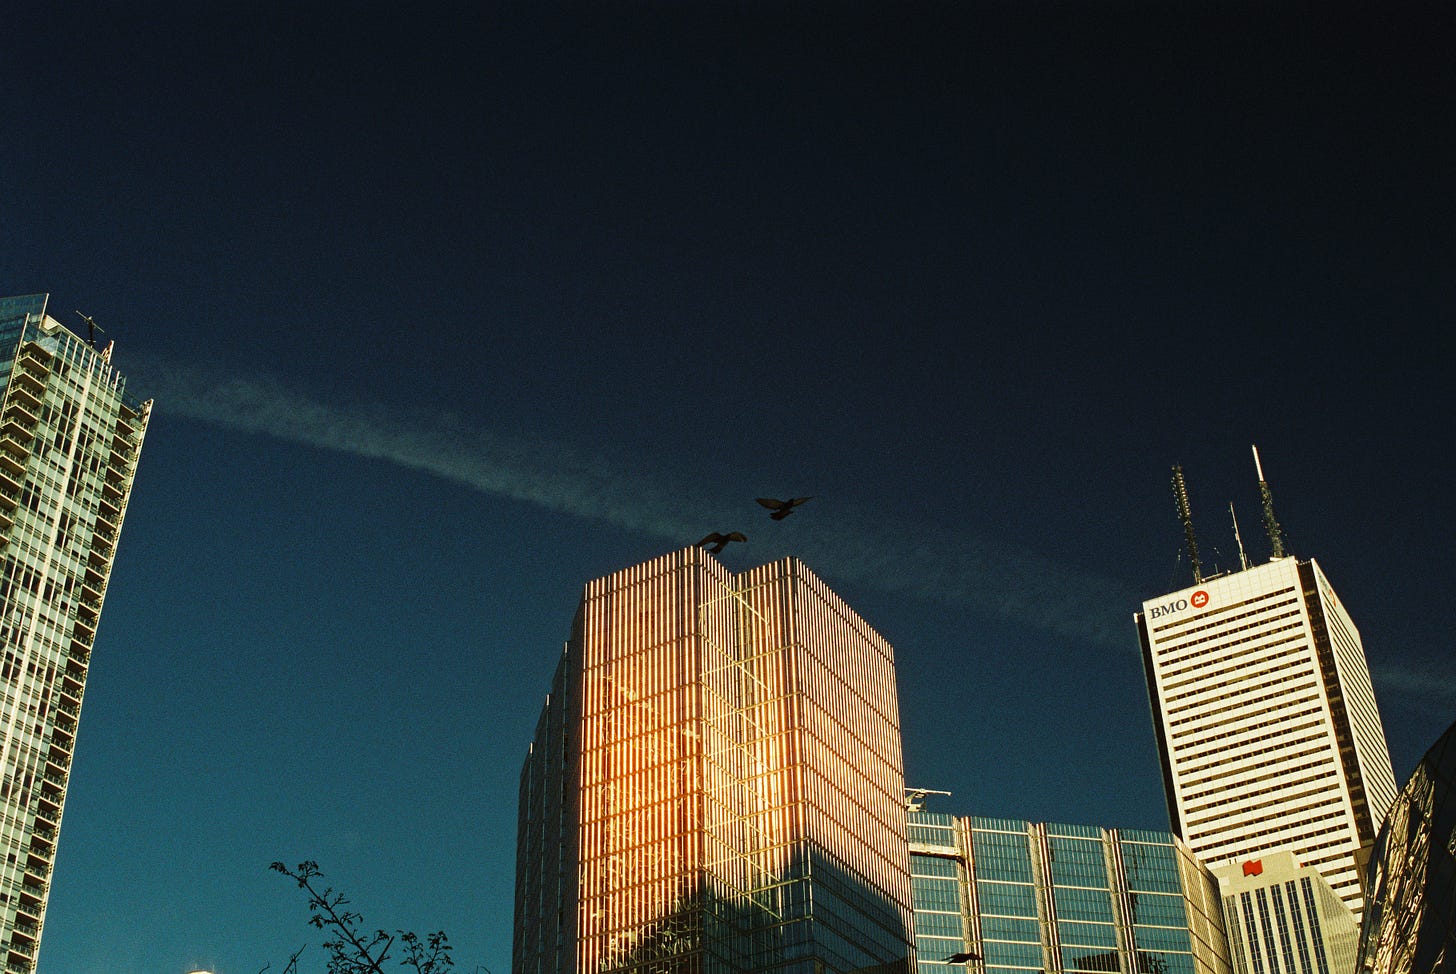 A cityscape of some skyscrapers with two black birds flying over one of the buildings.